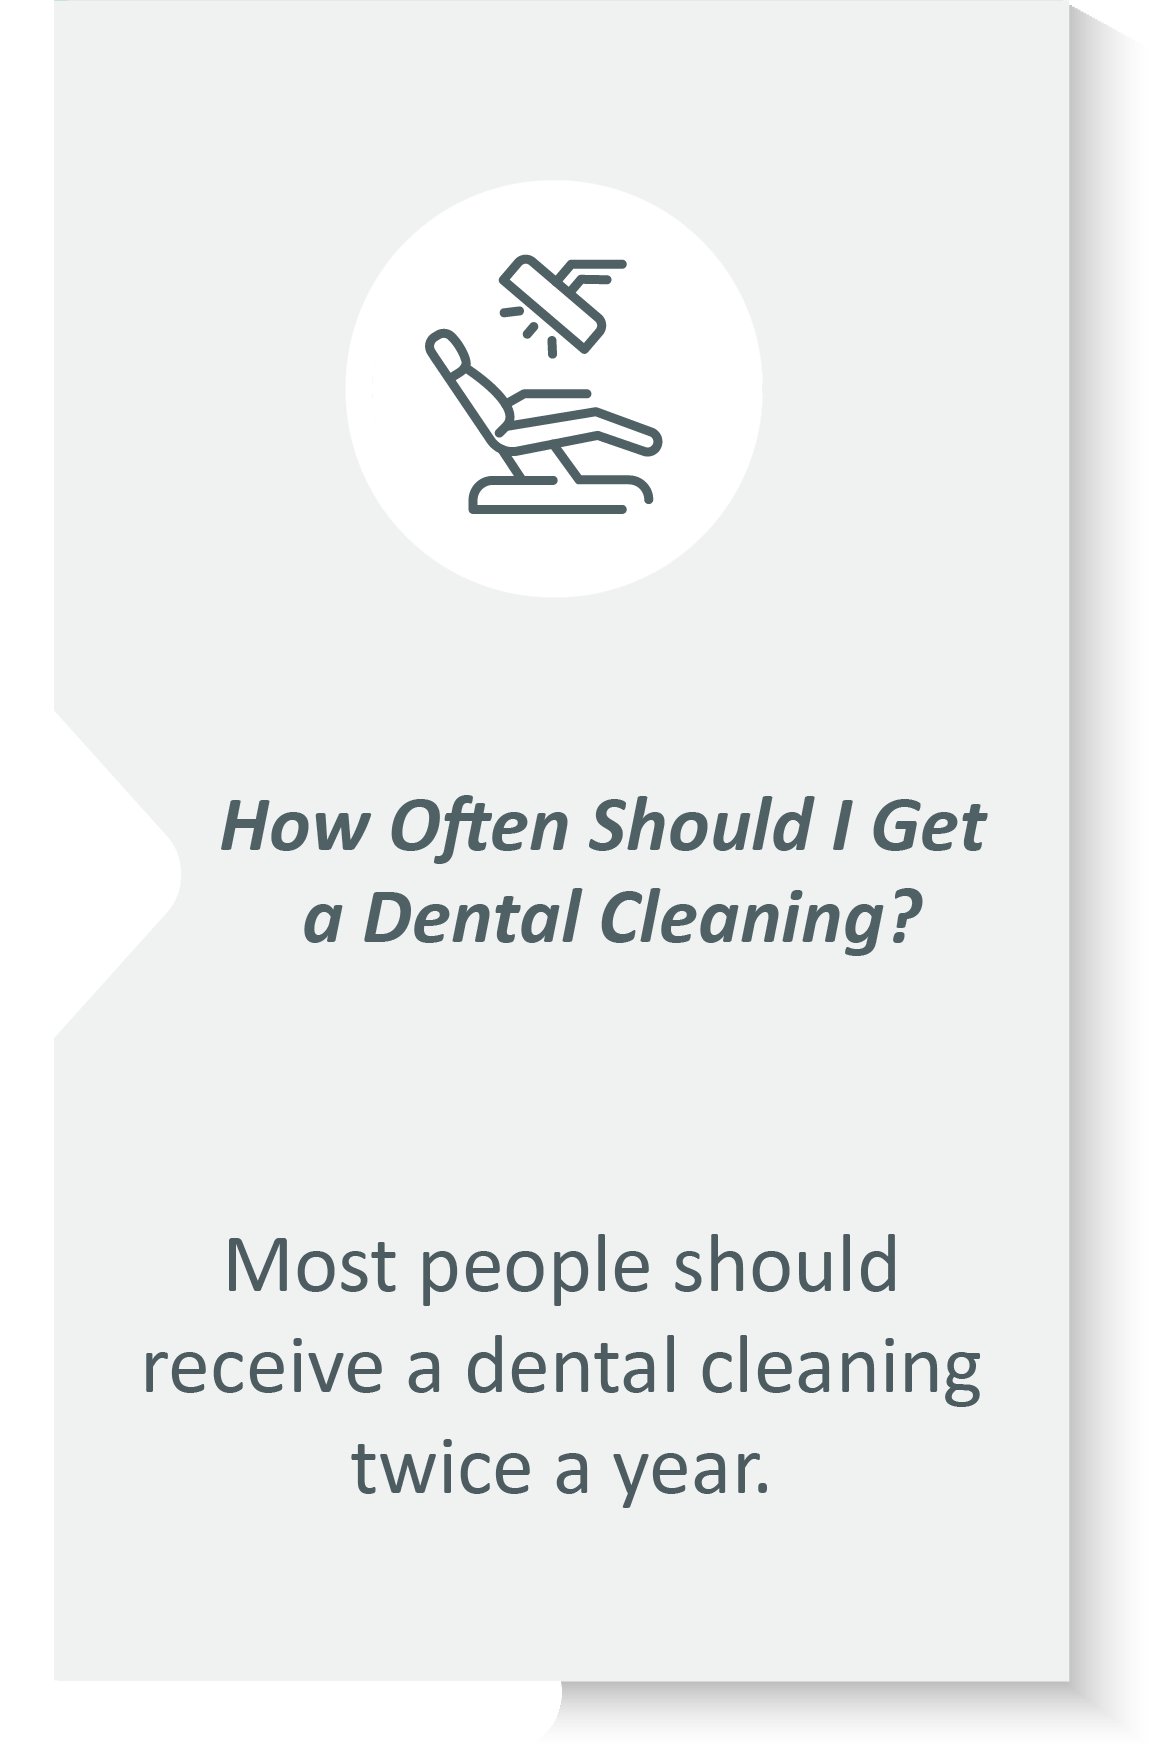 Dental cleaning infographic: Most people should receive a dental cleaning twice a year.